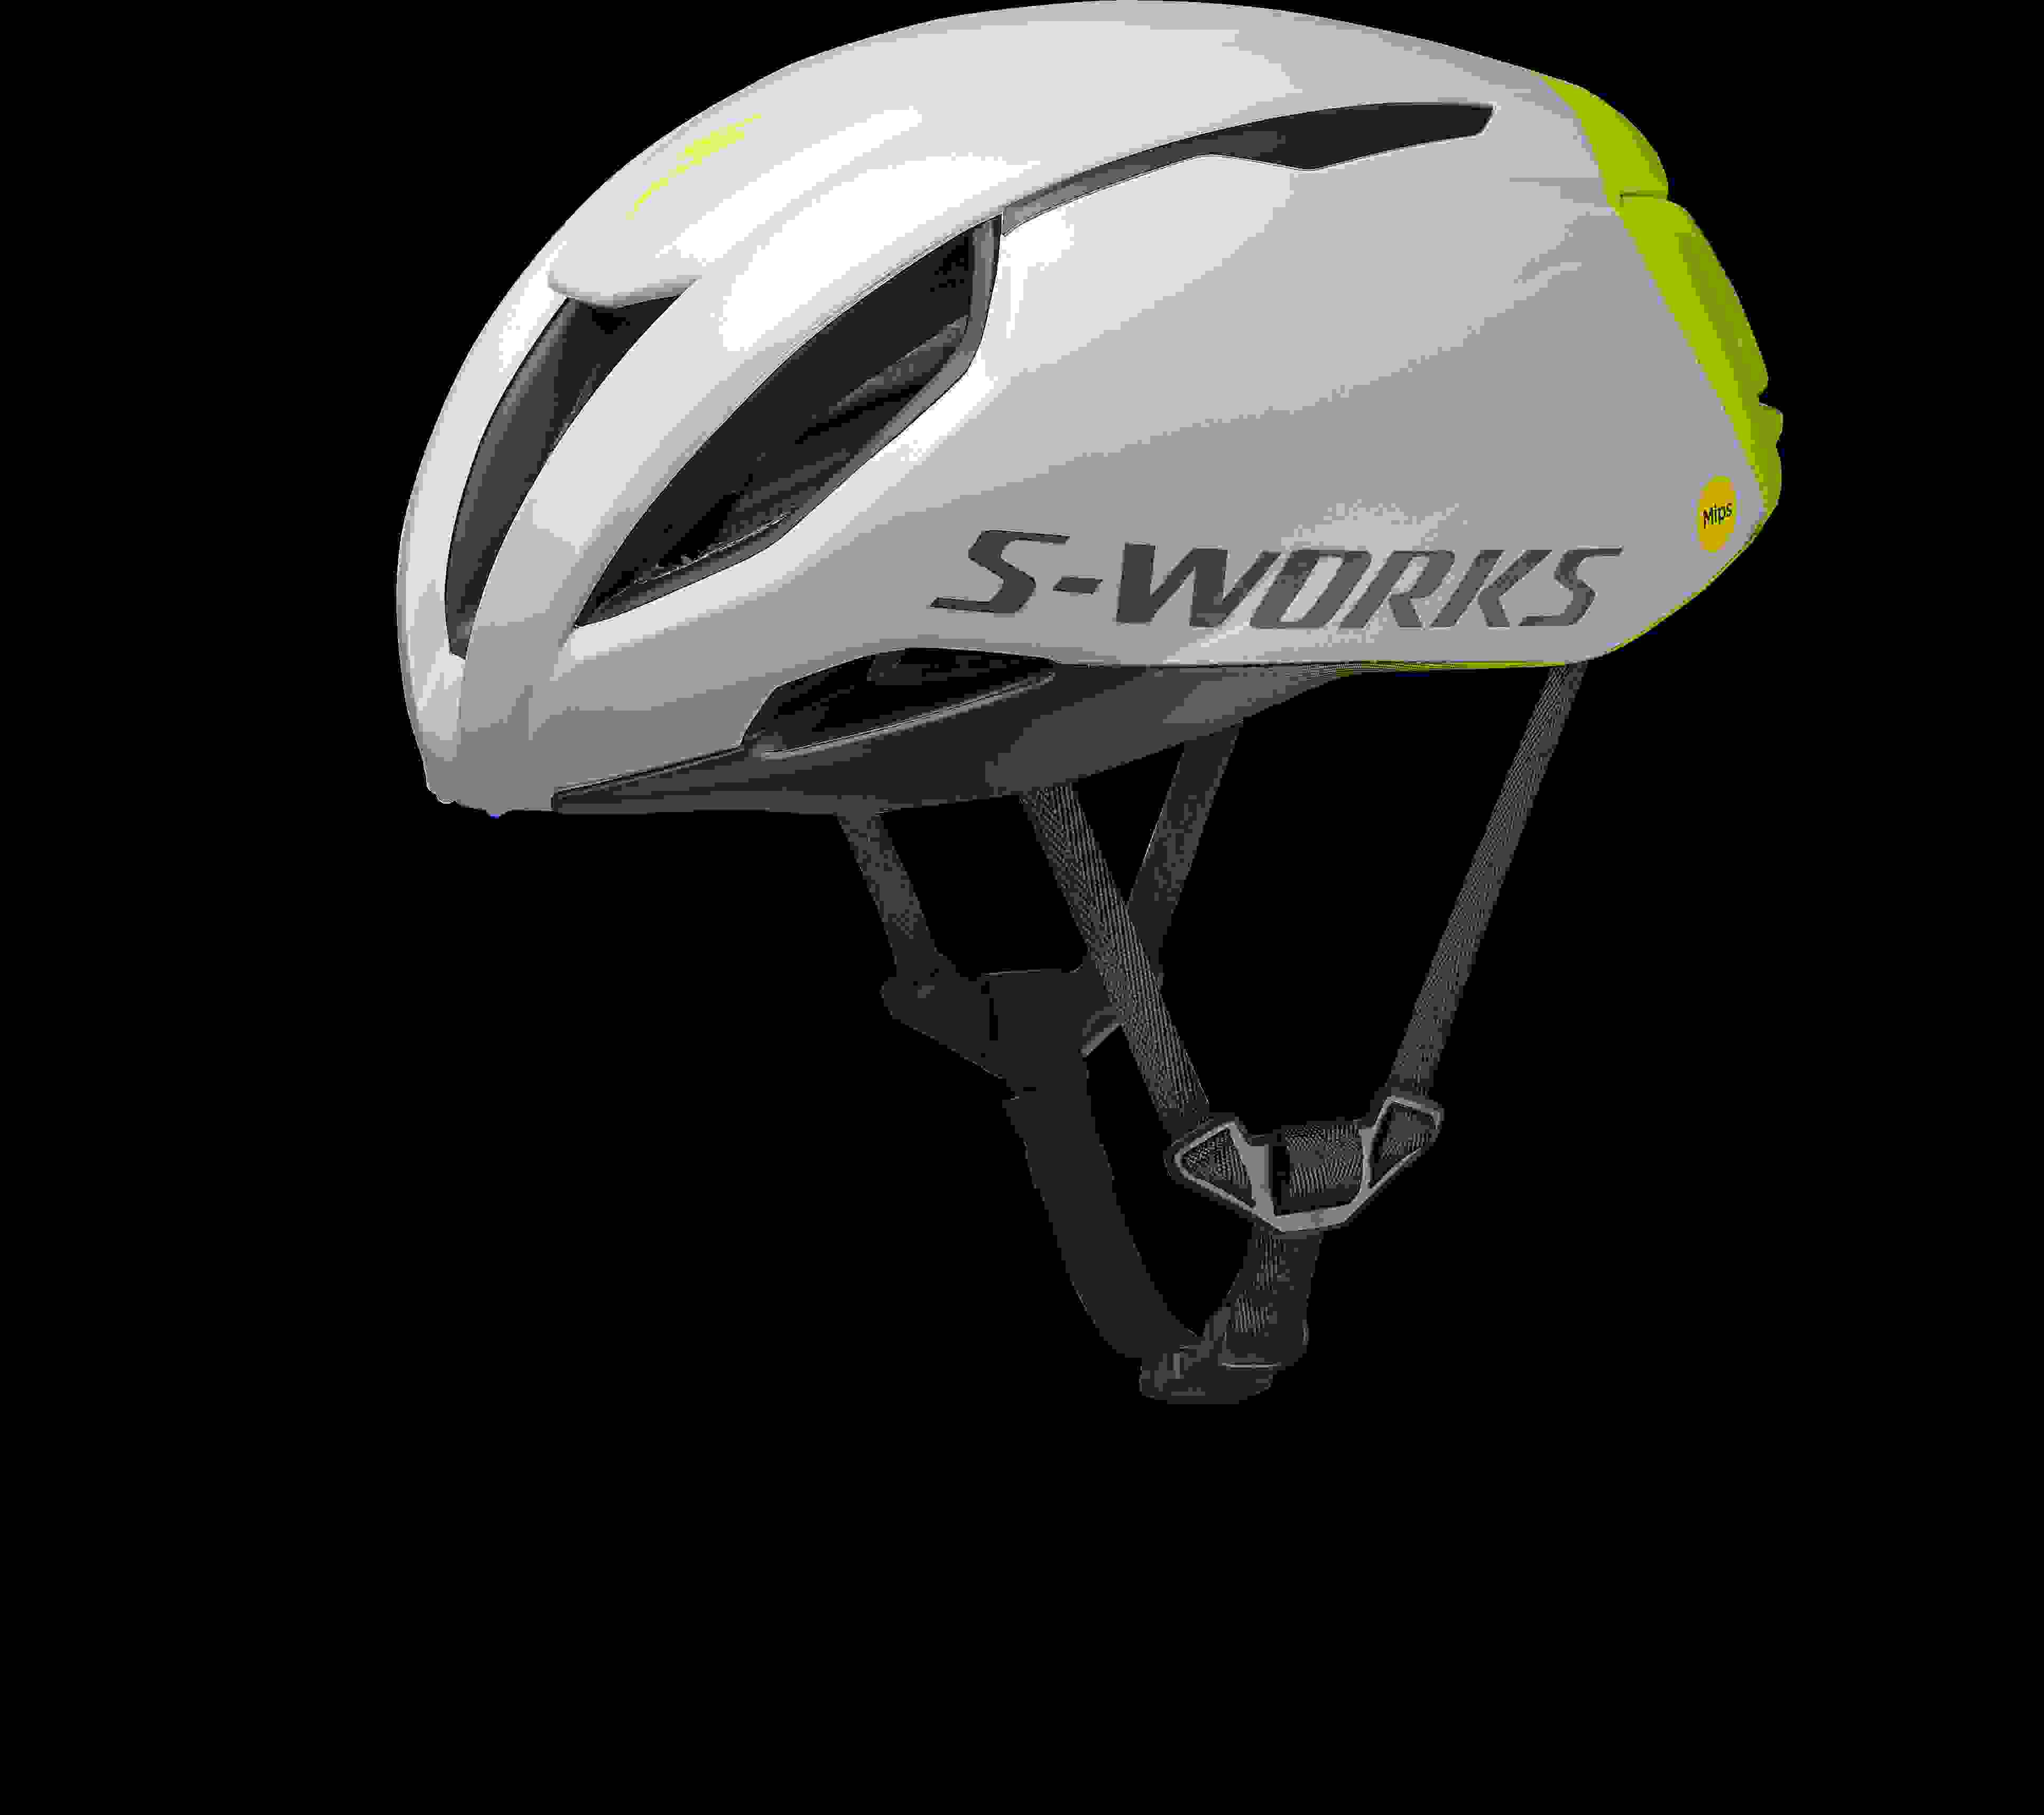 TESTE capacete Specialized S-Works Evade 3